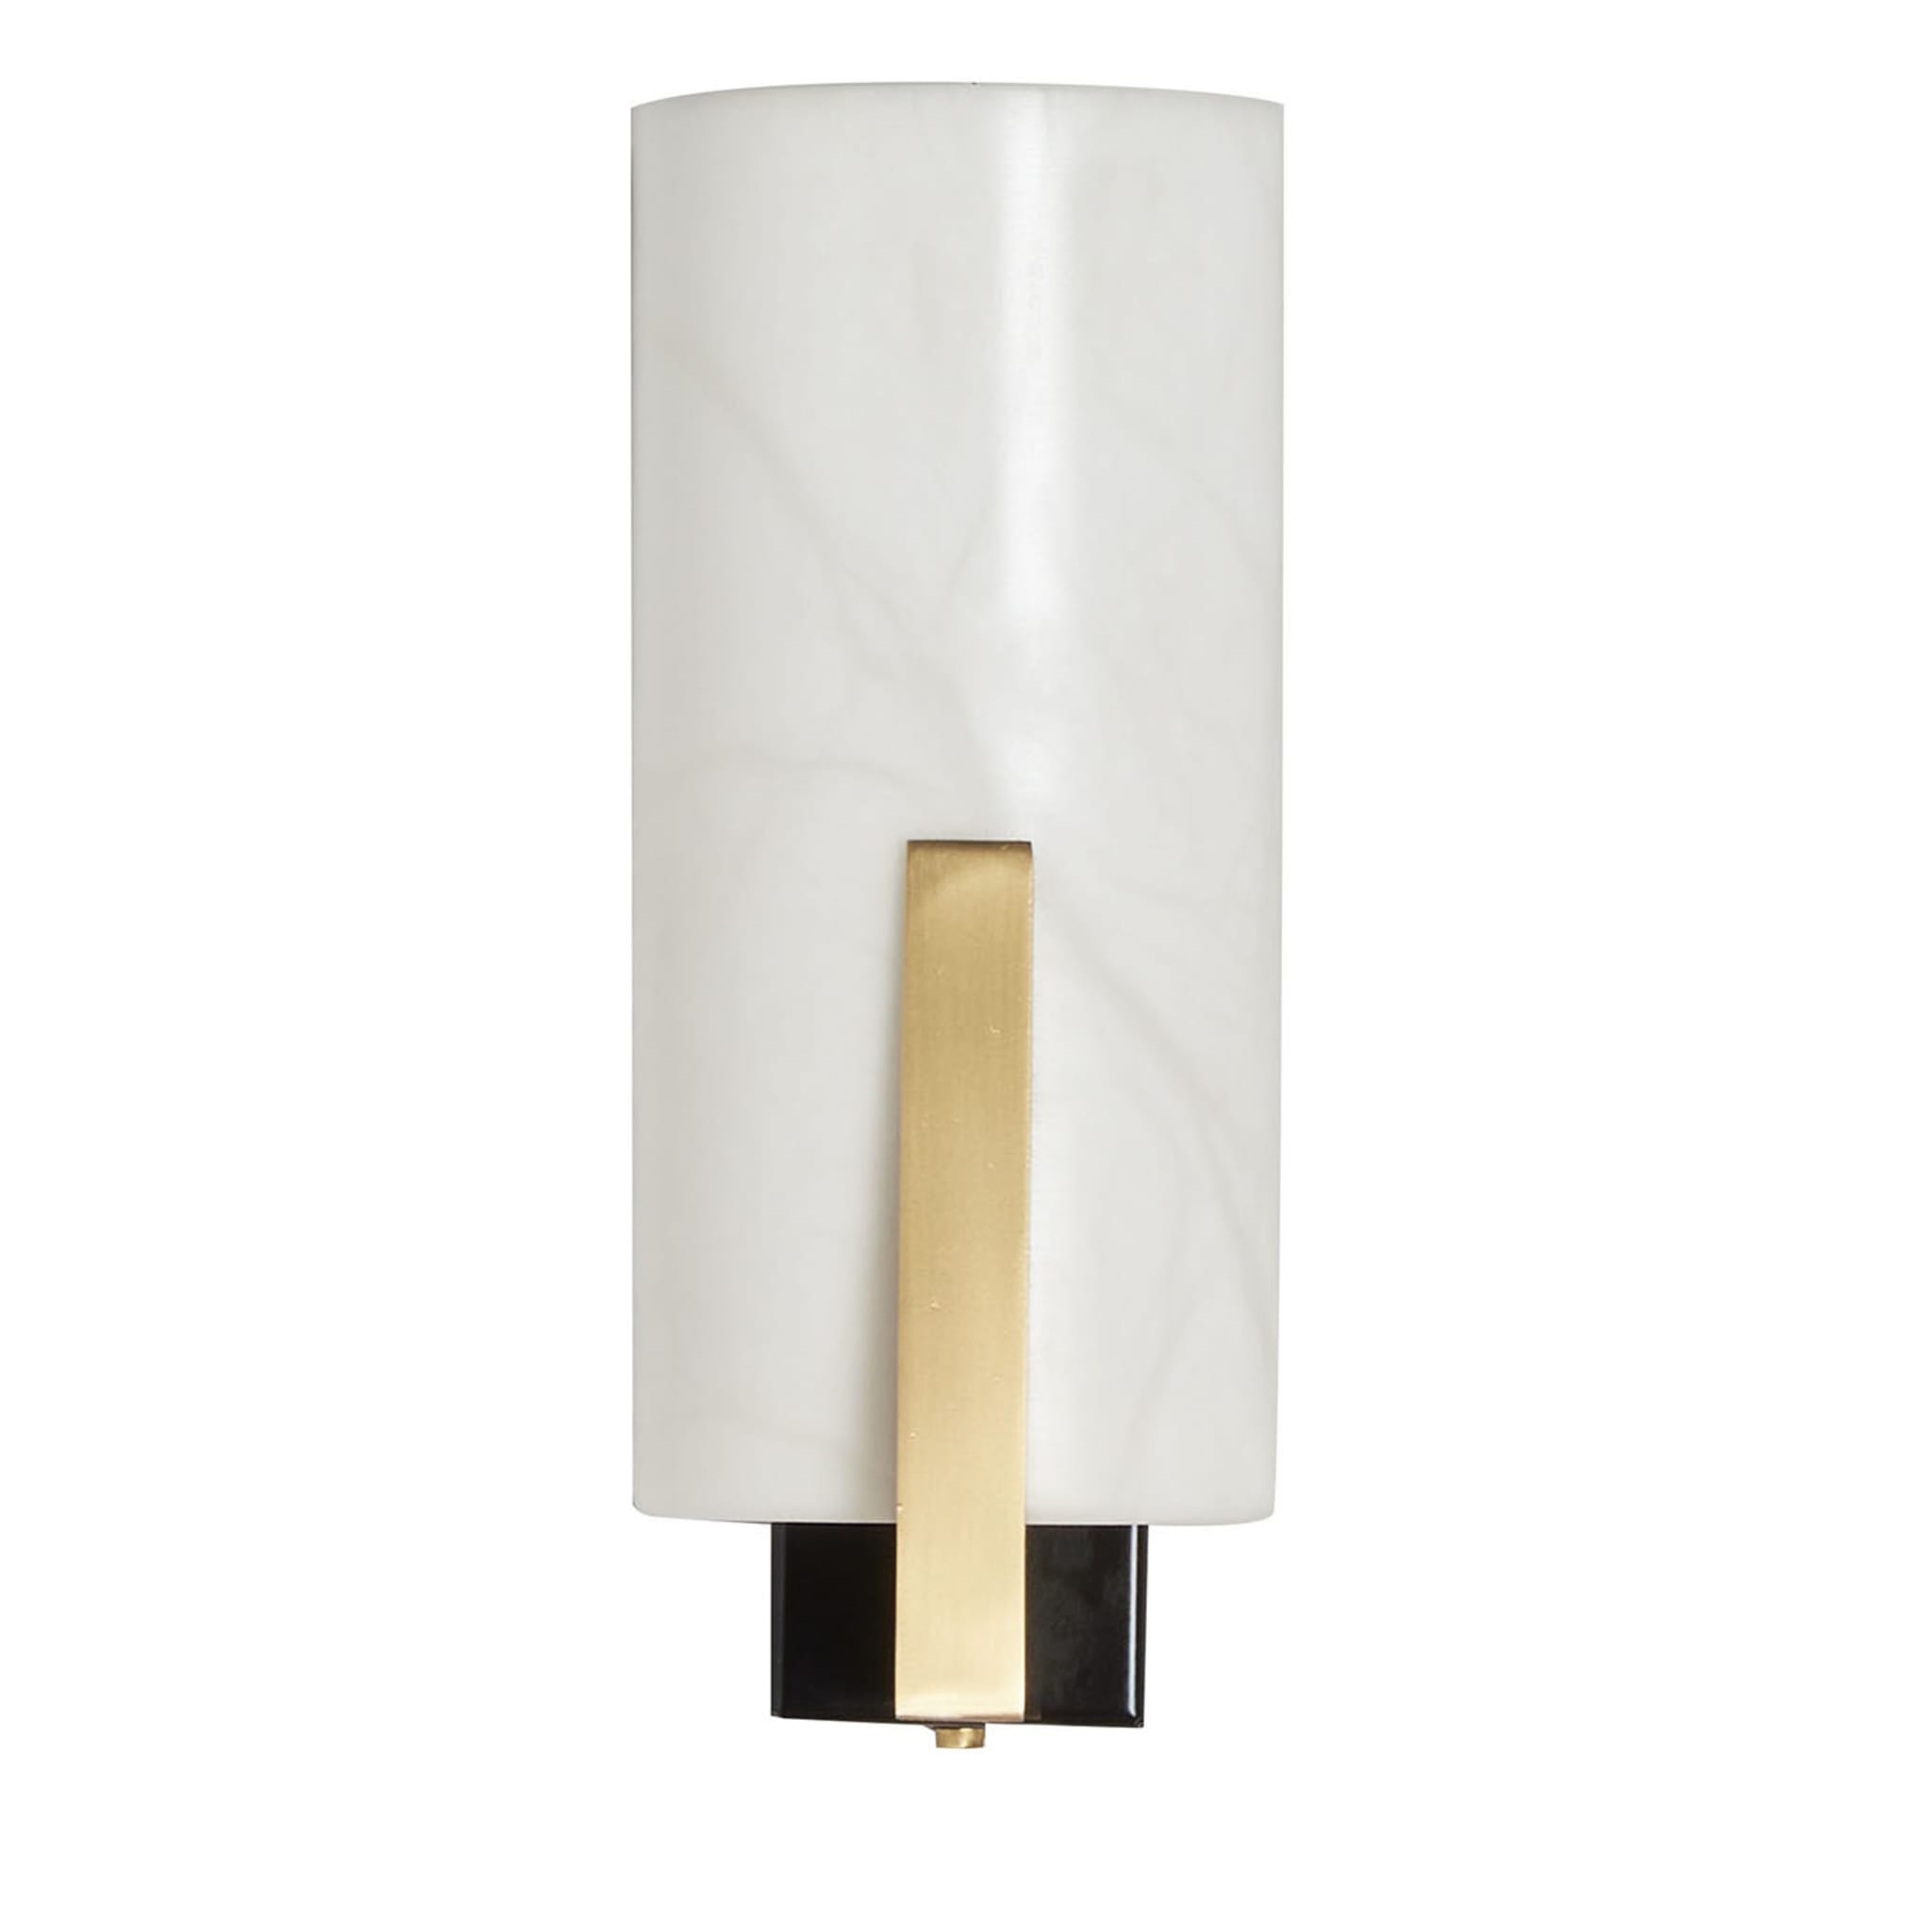 "Zeno" Wall Sconce in Satin Brass, Mat Black and Alabaster - Main view